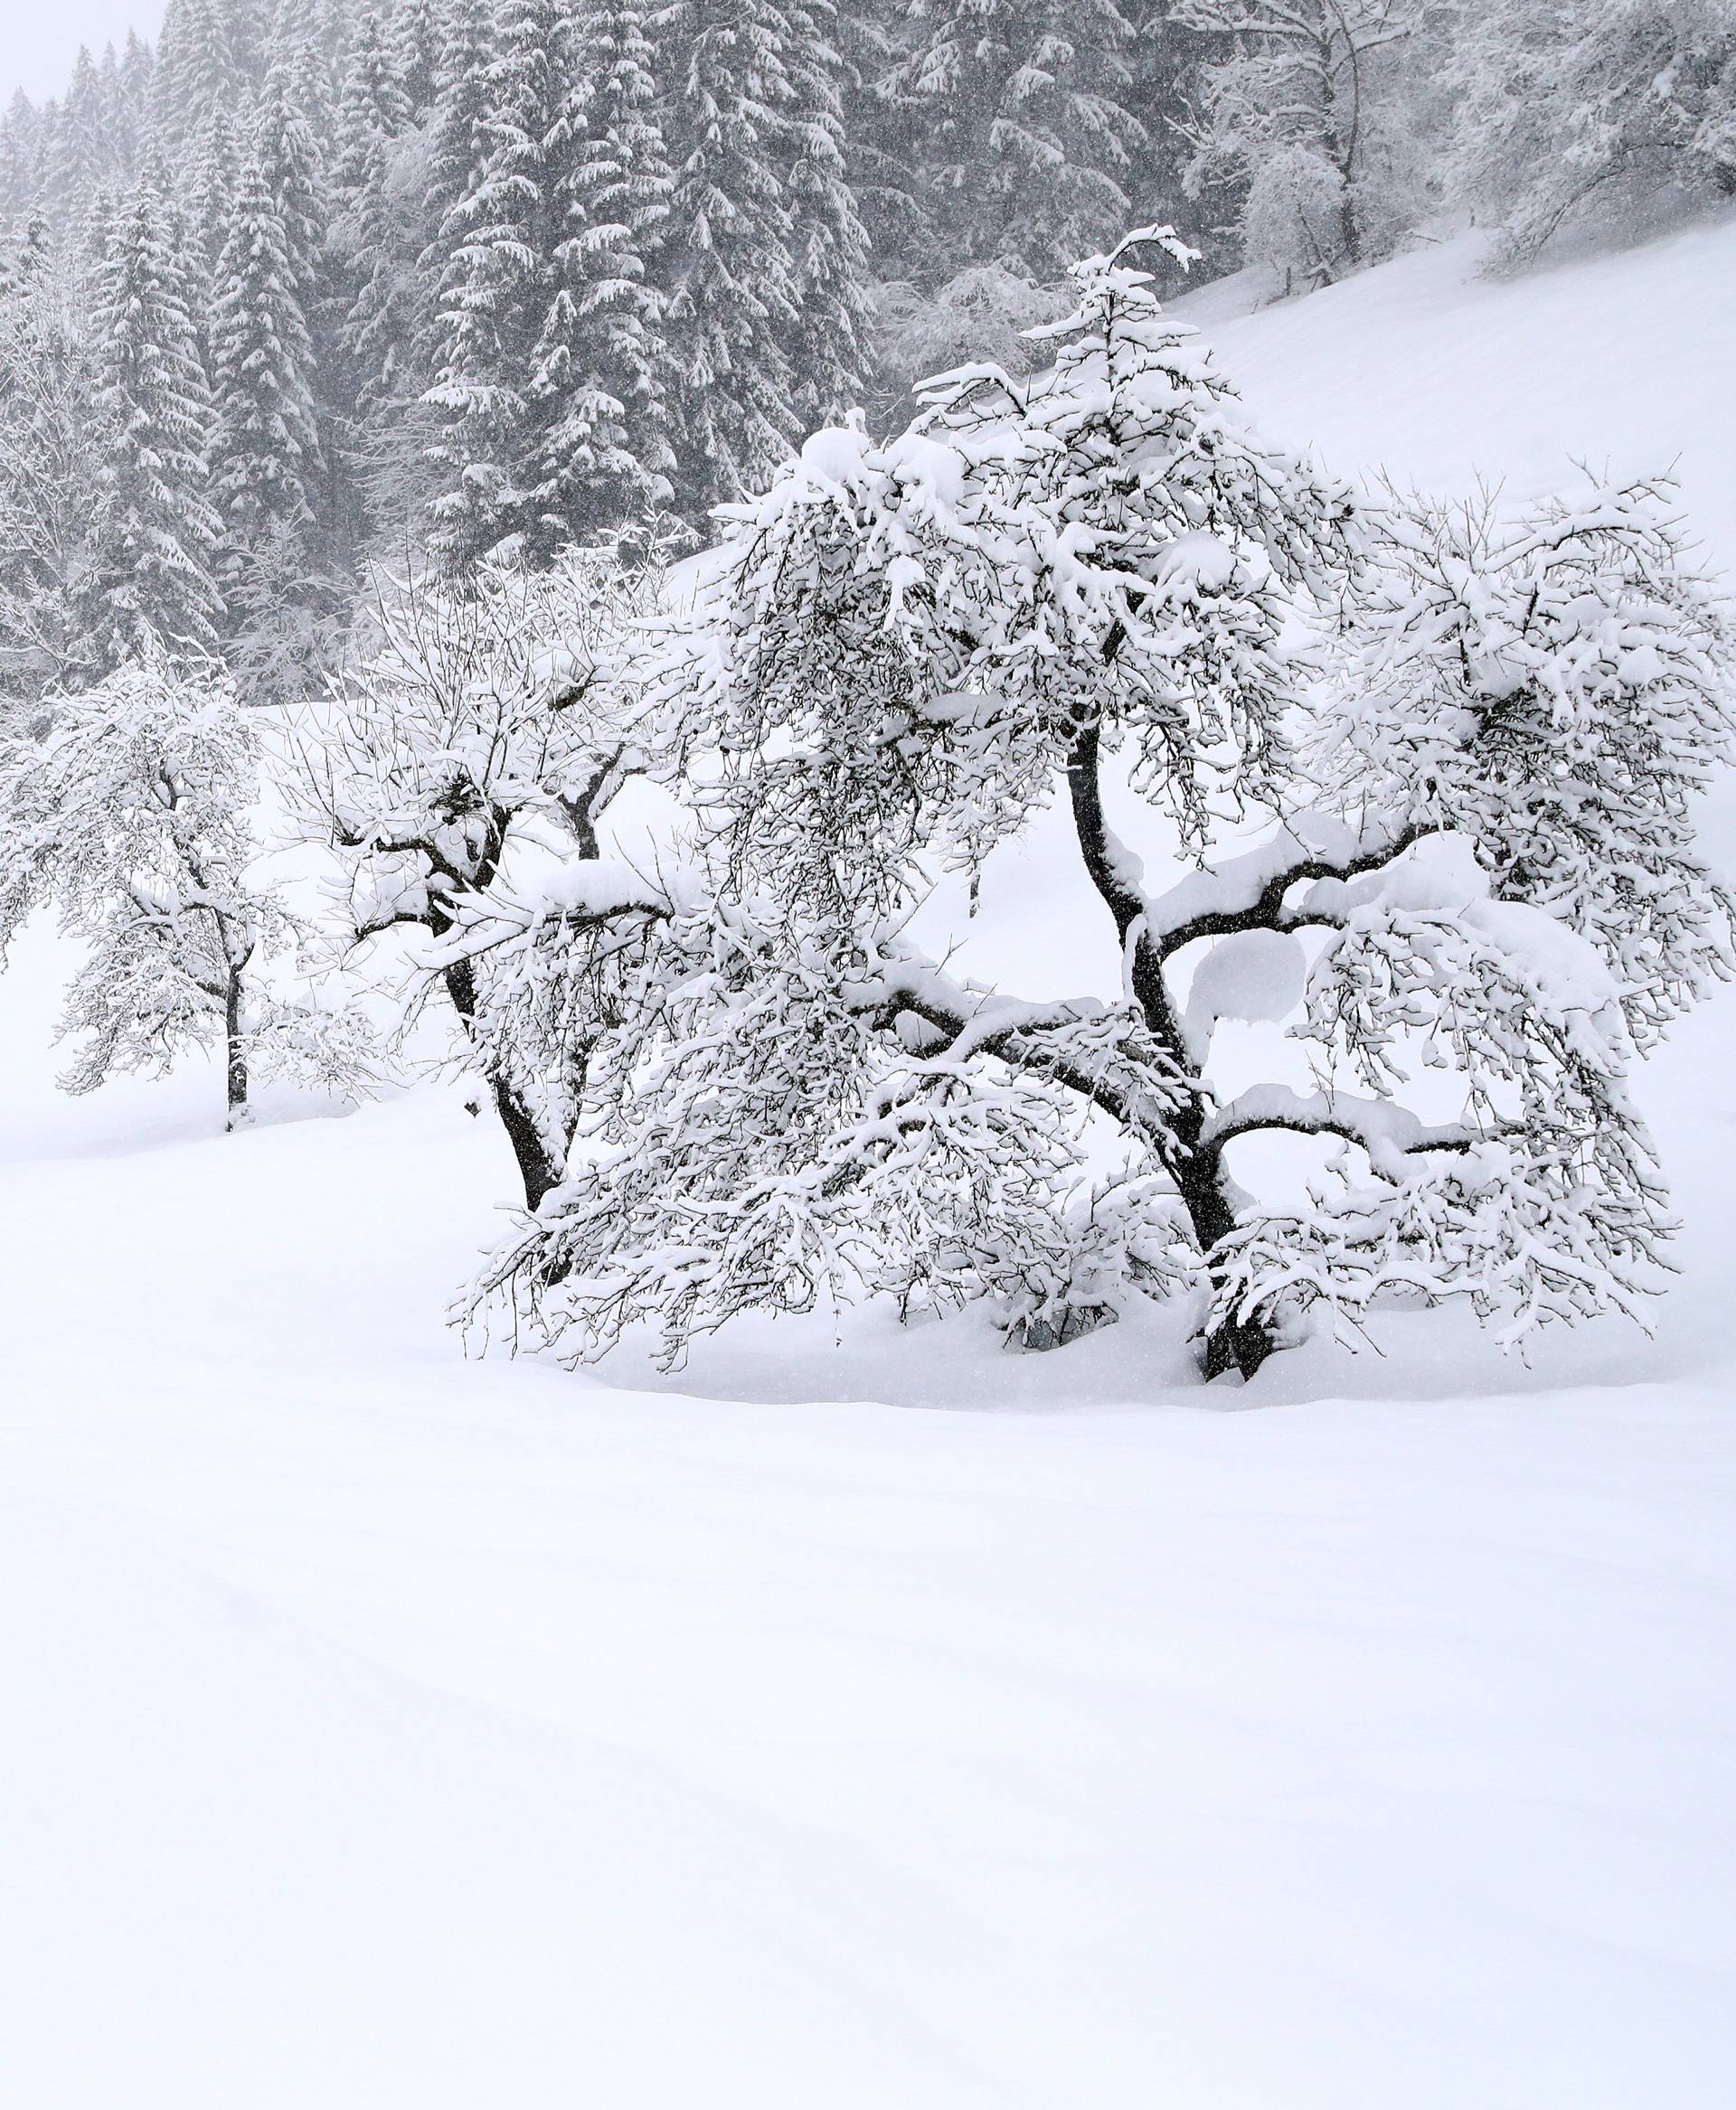 Trees are covered with snow during heavy snowfall near Goestling